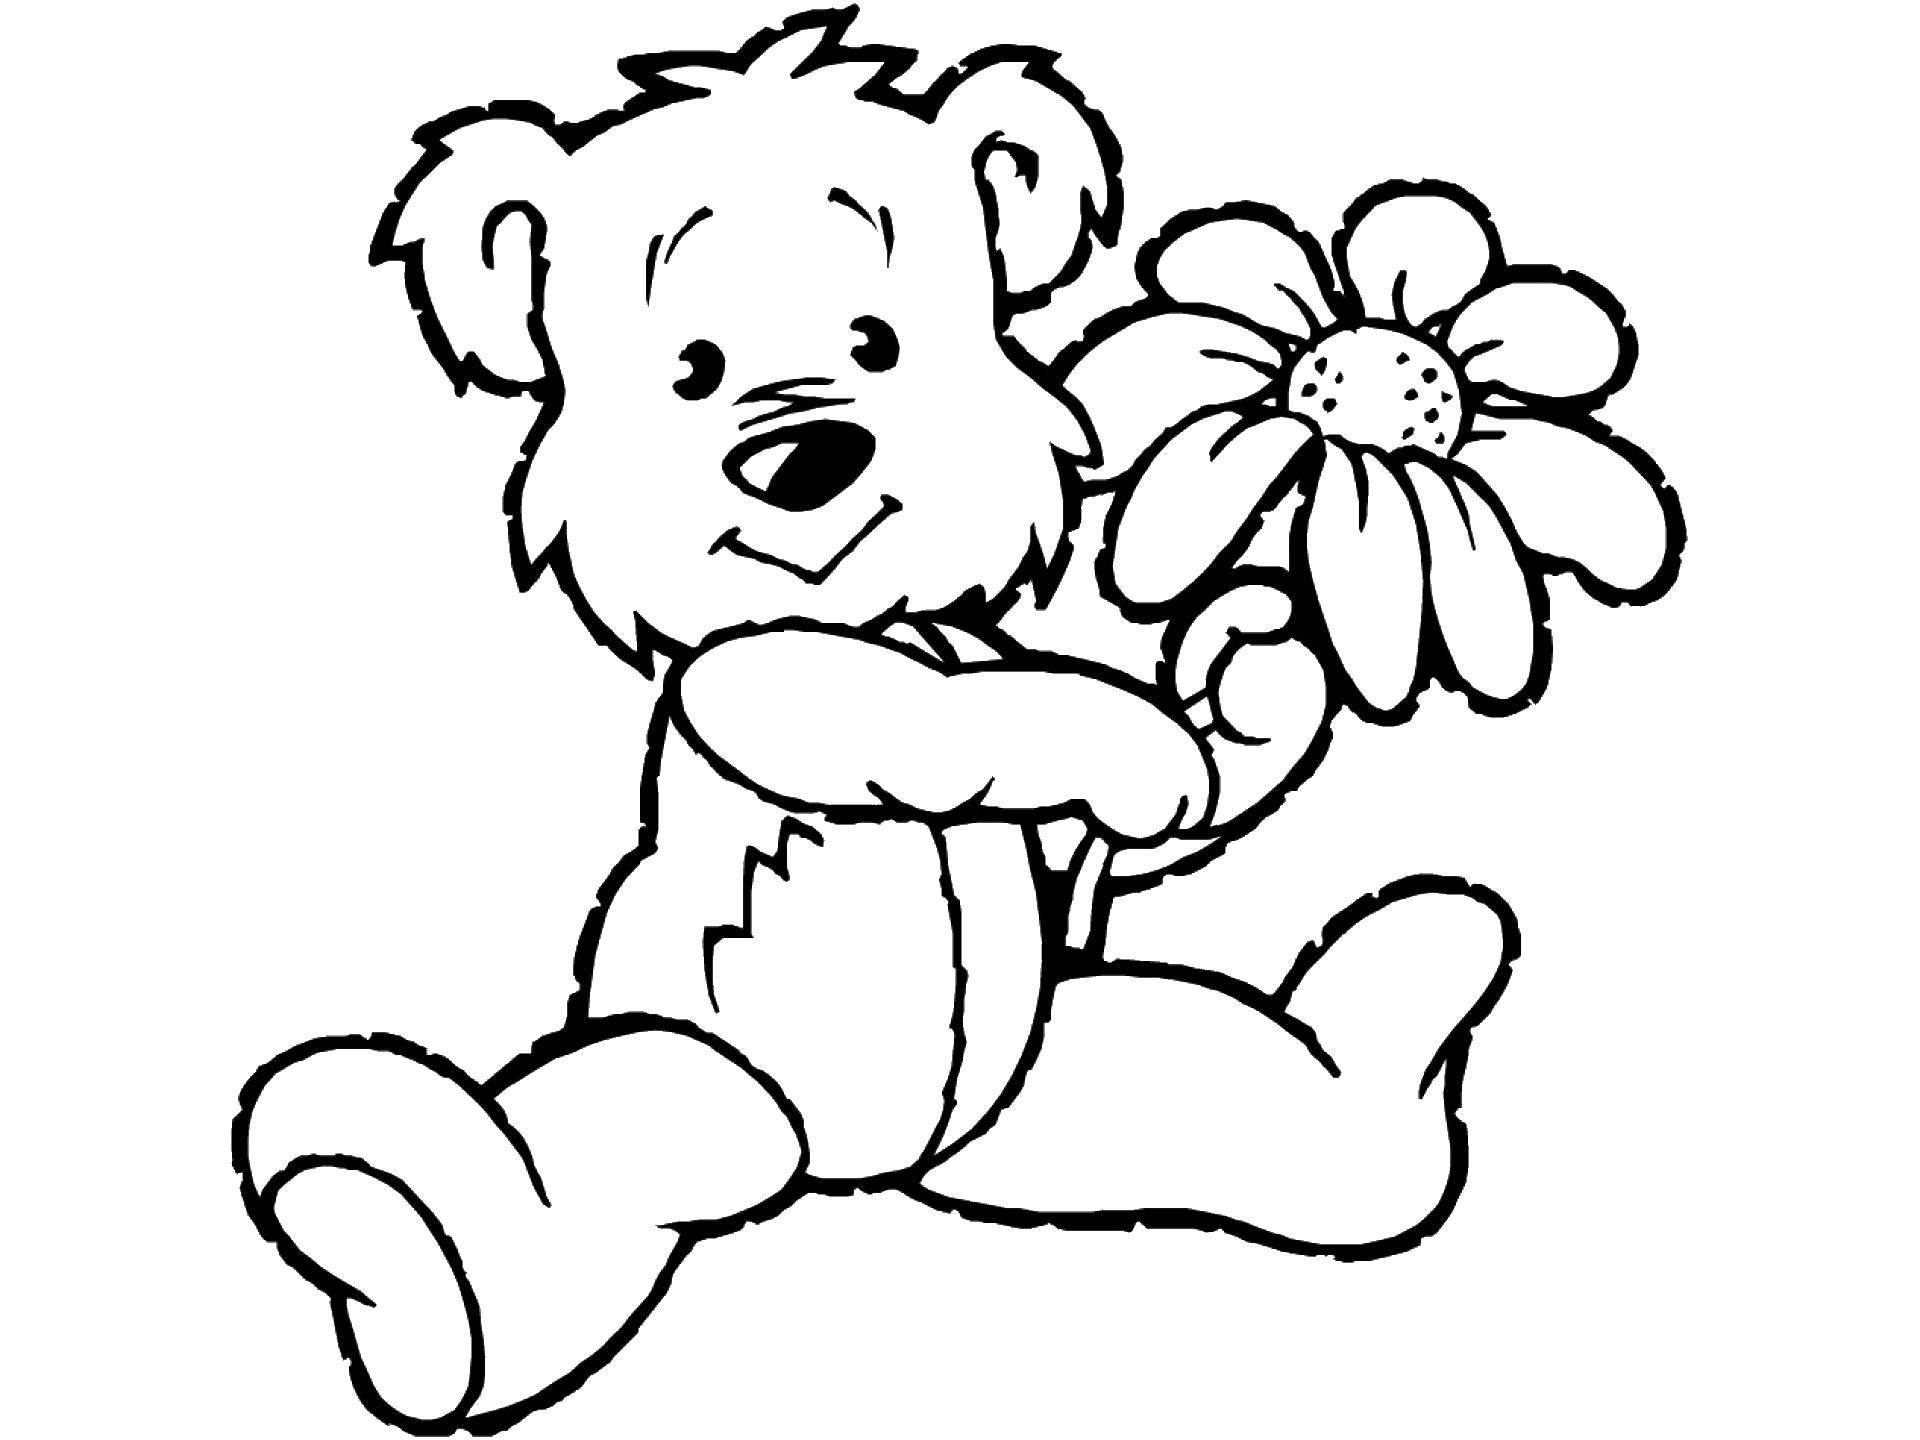 Coloring Bear and flower. Category cartoons. Tags:  bear , toy, flower.